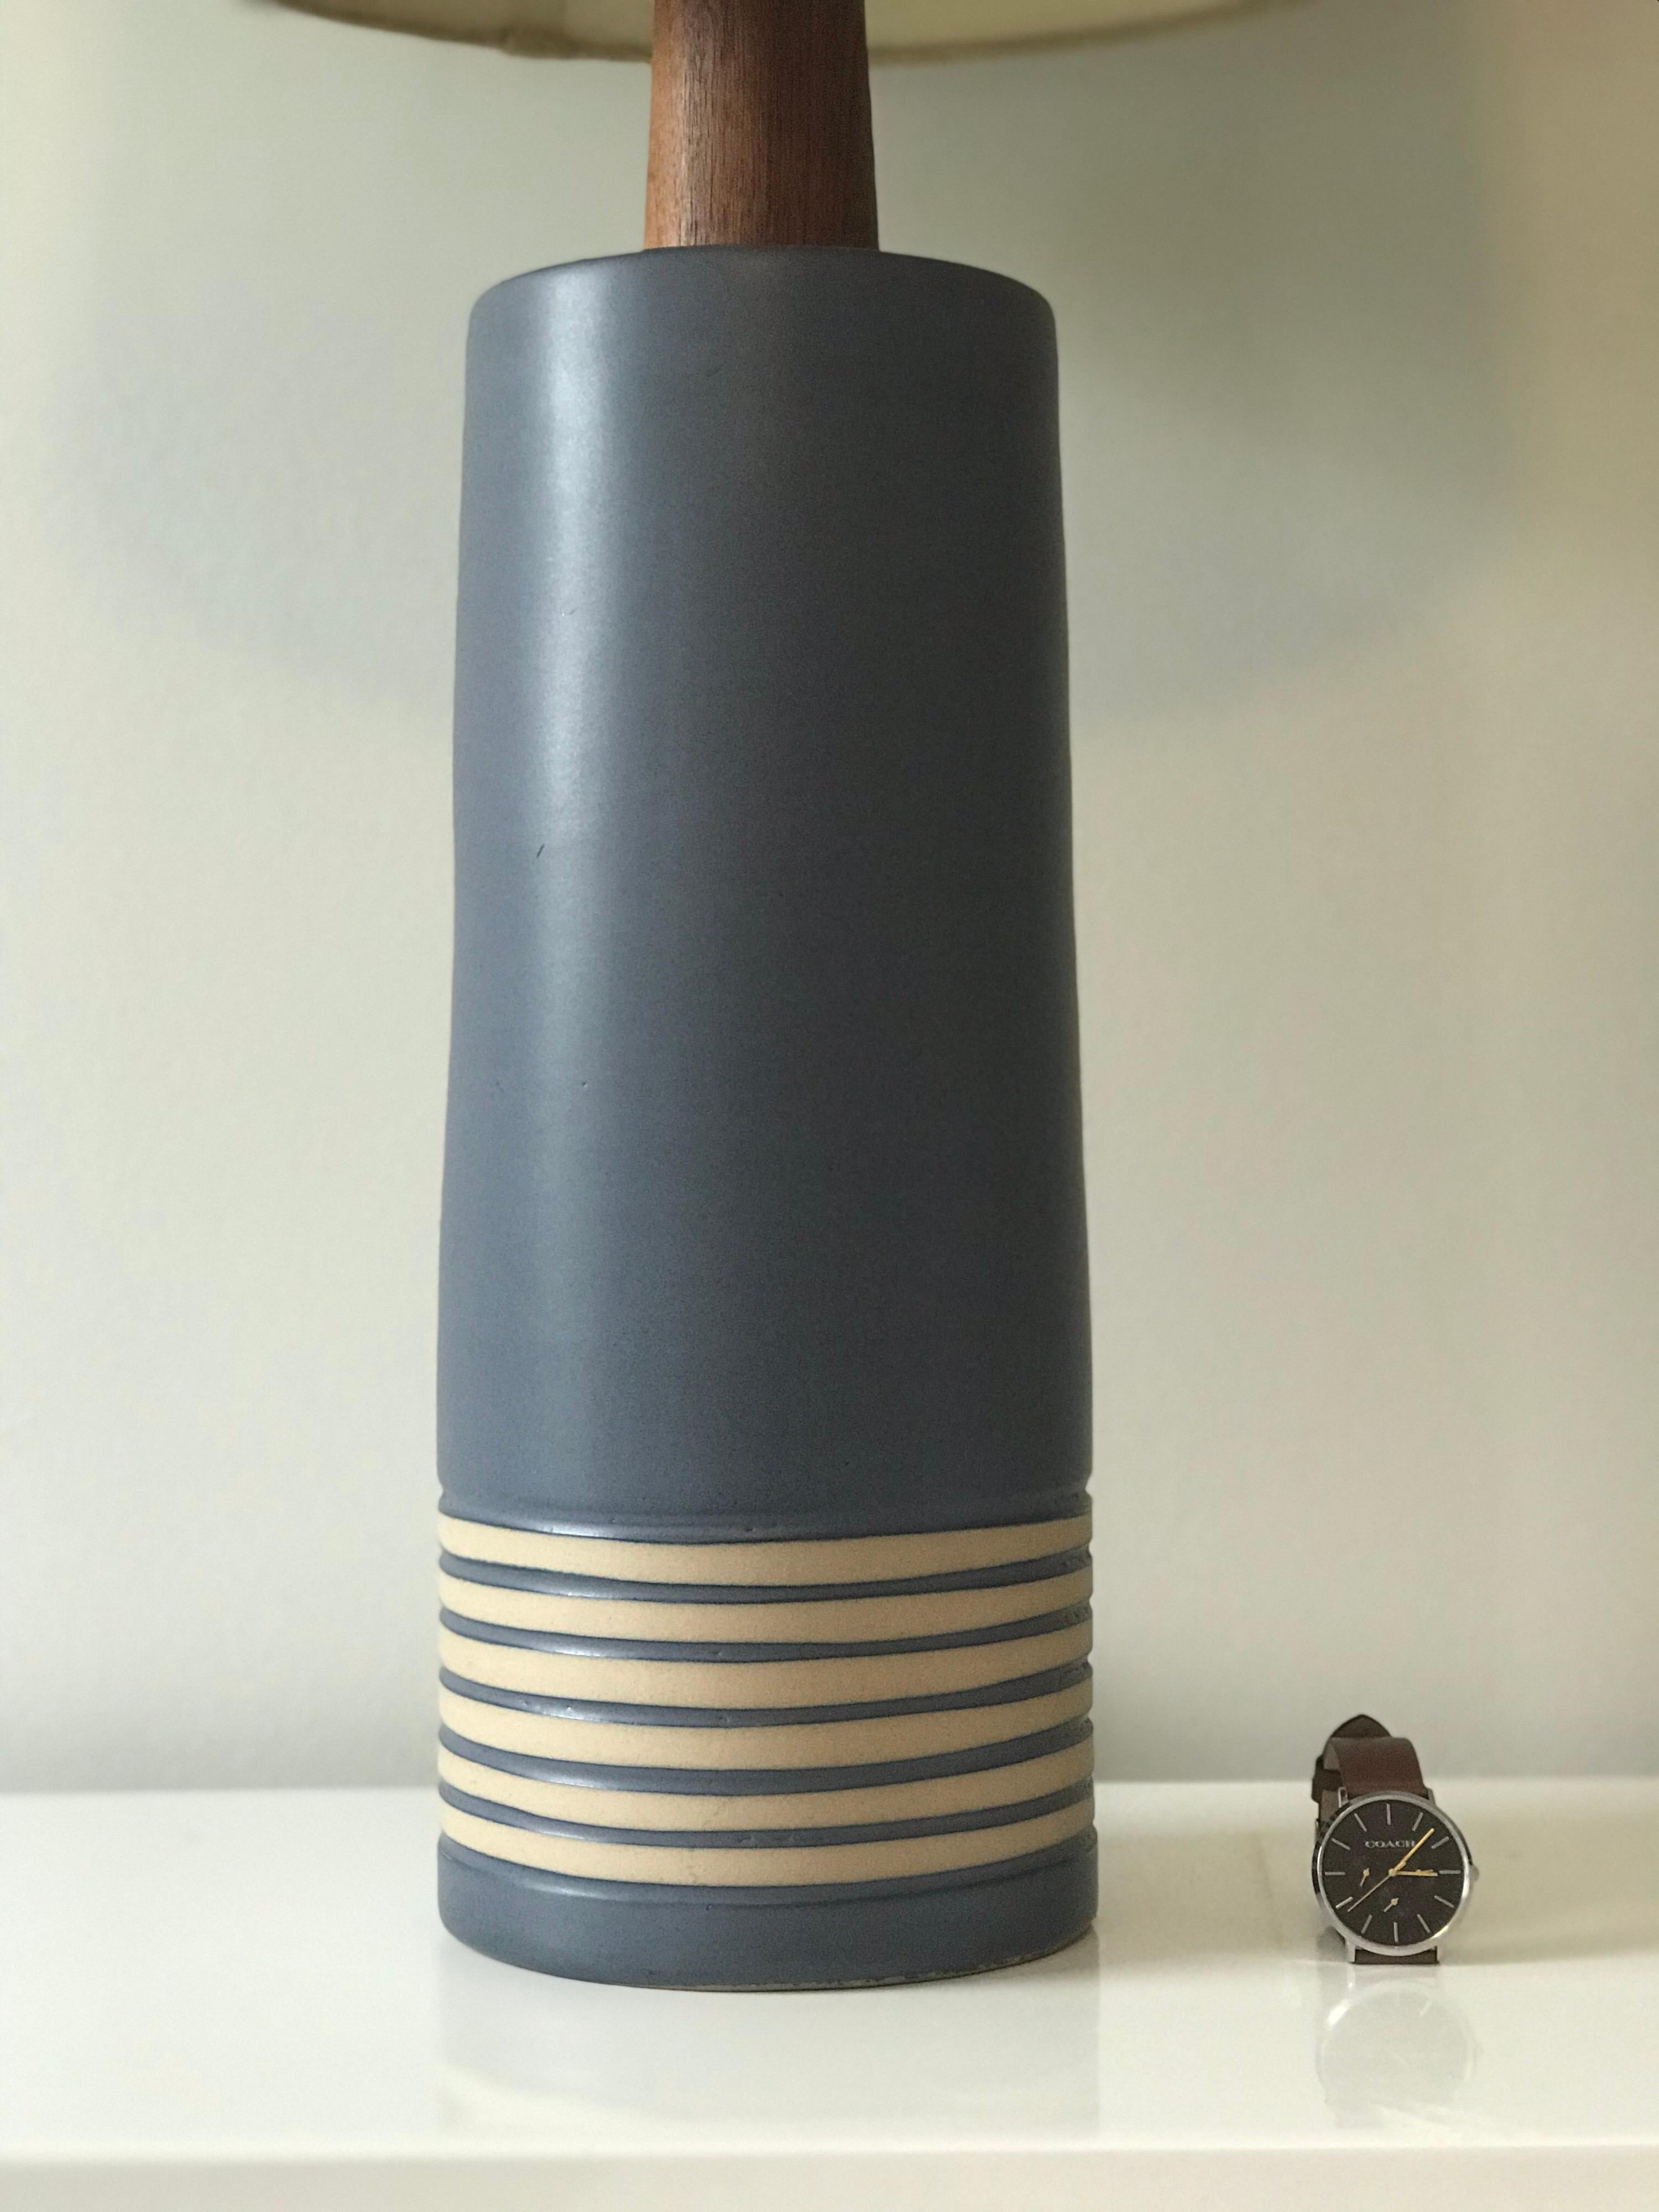 Beautiful and impressive lamp by famed ceramicists duo Jane and Gordon Martz for Marshall Studios. Lamp is in excellent shape. Shade is new and Included.

Measures: Overall - 34